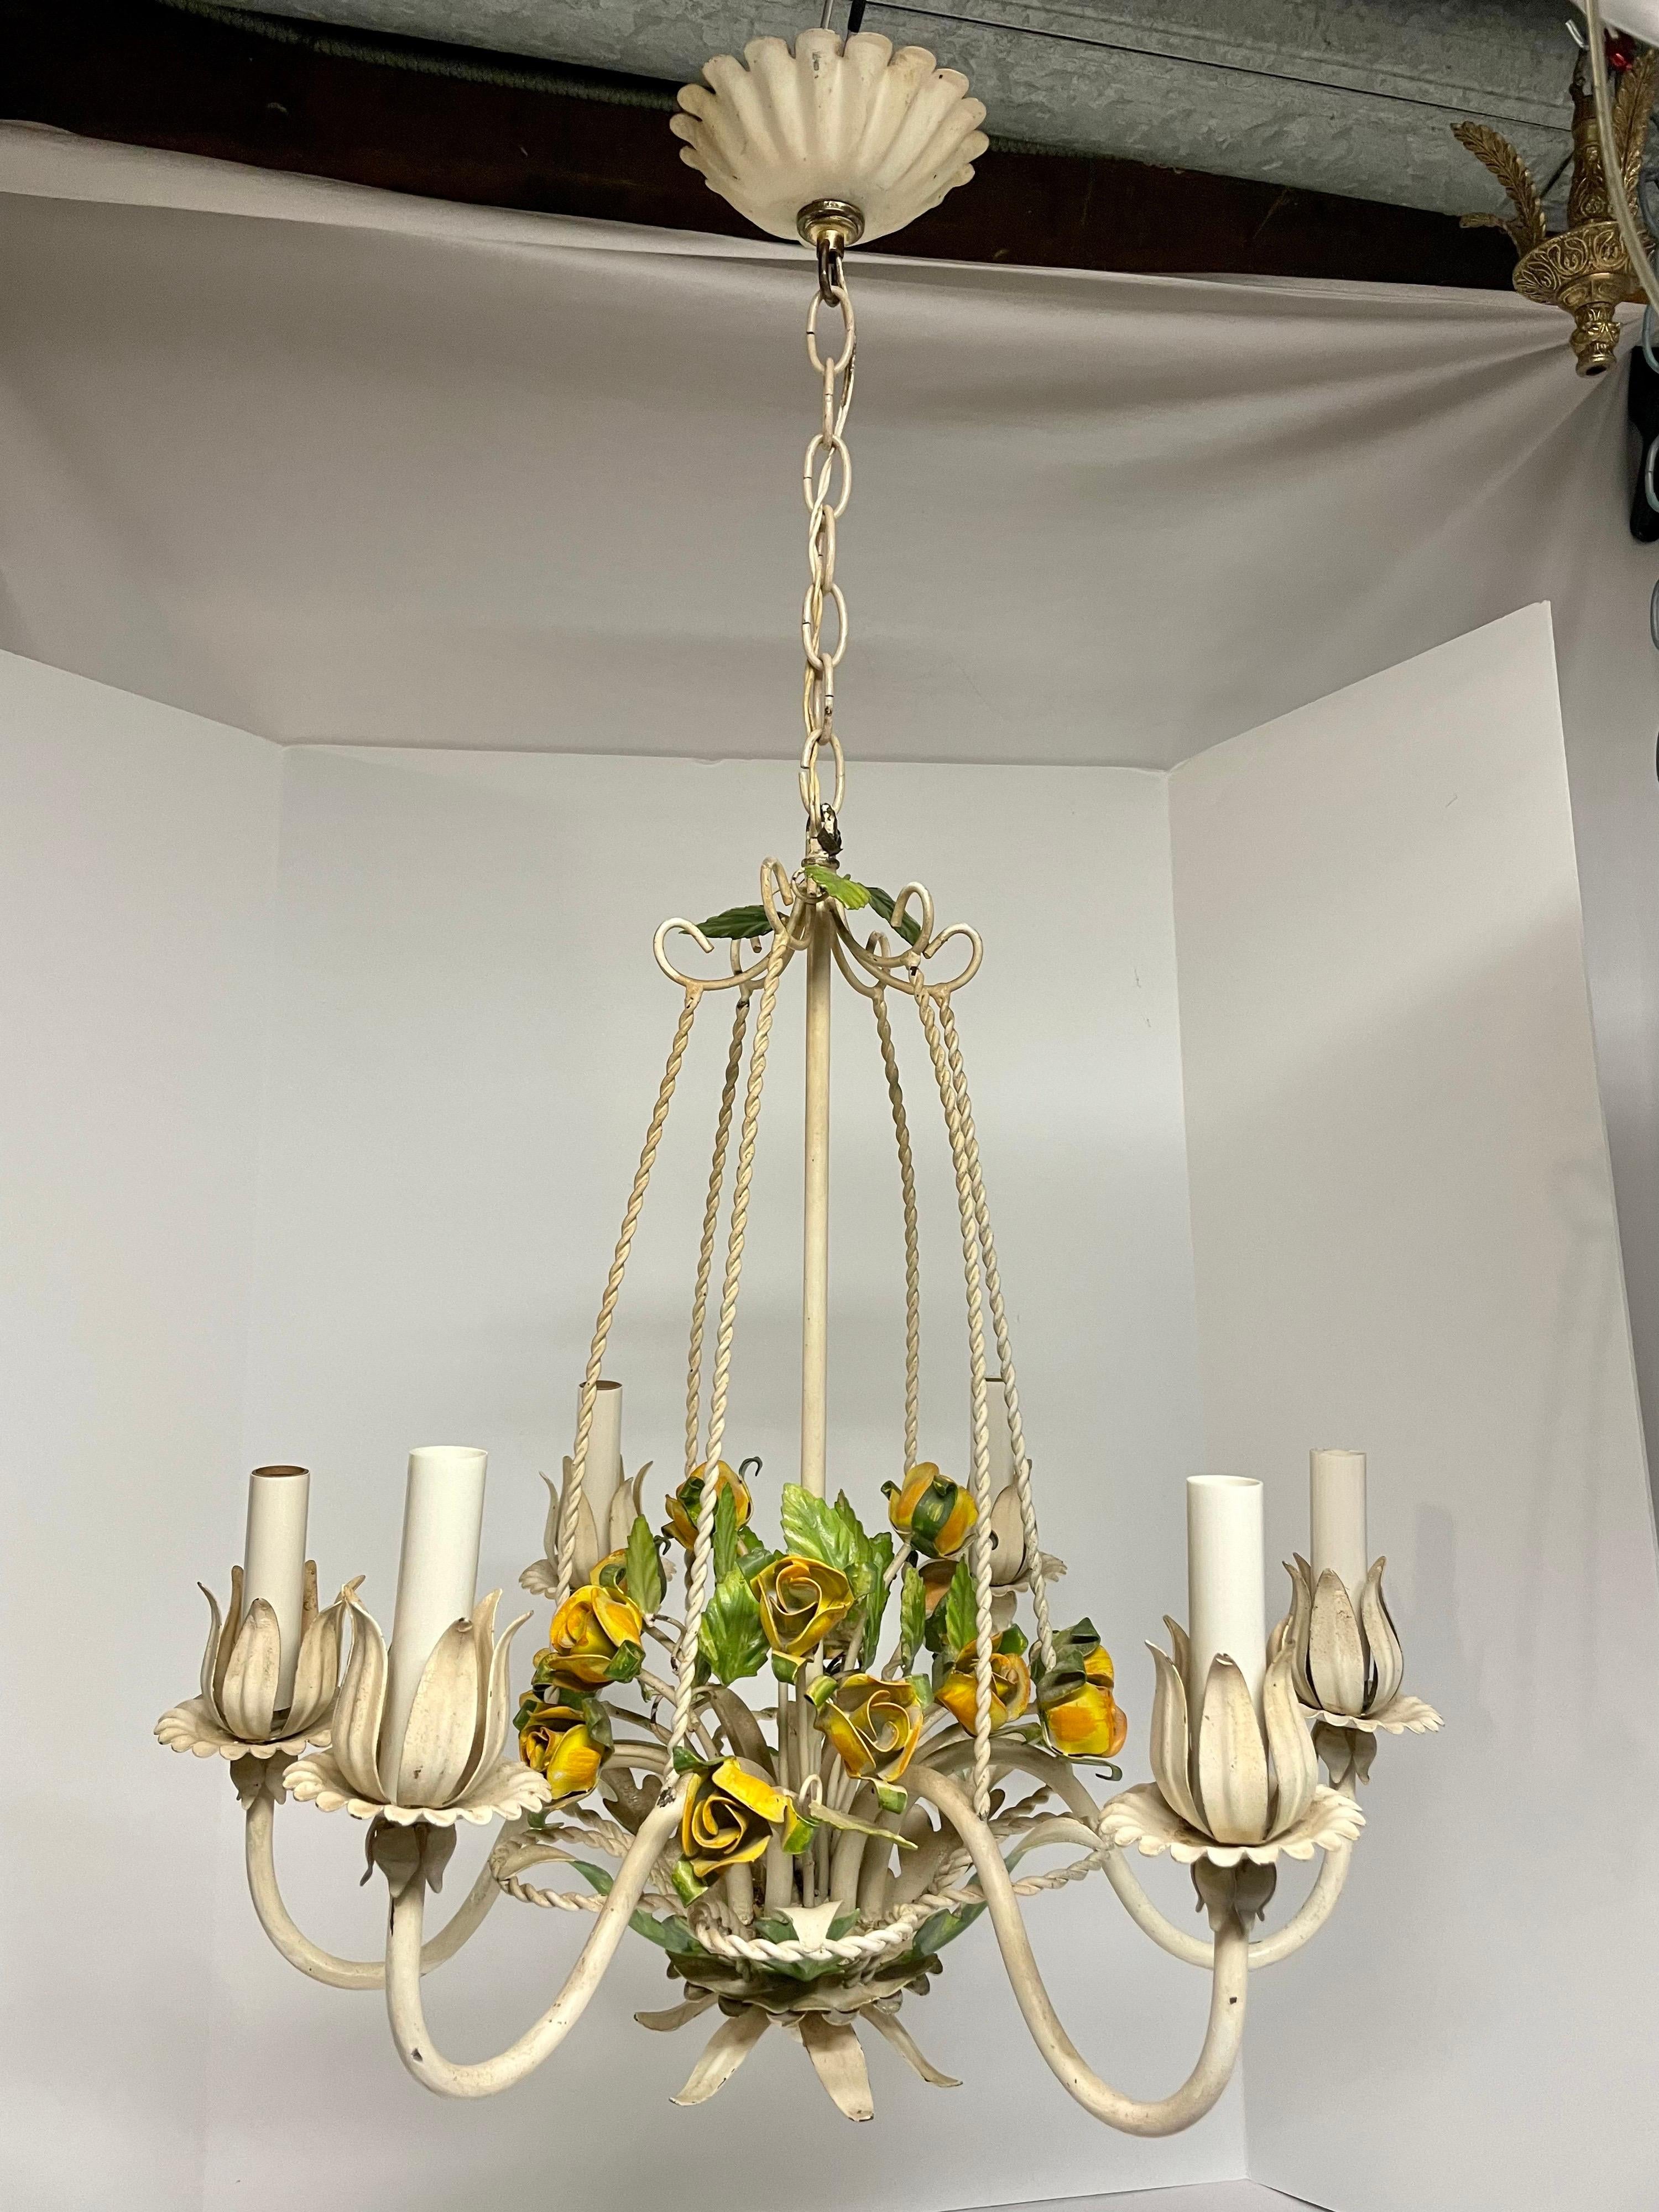 Hollywood Regency tole floral chandelier with roses. Original ceiling cap. Made in Italy tag. Six arms. Measures 20